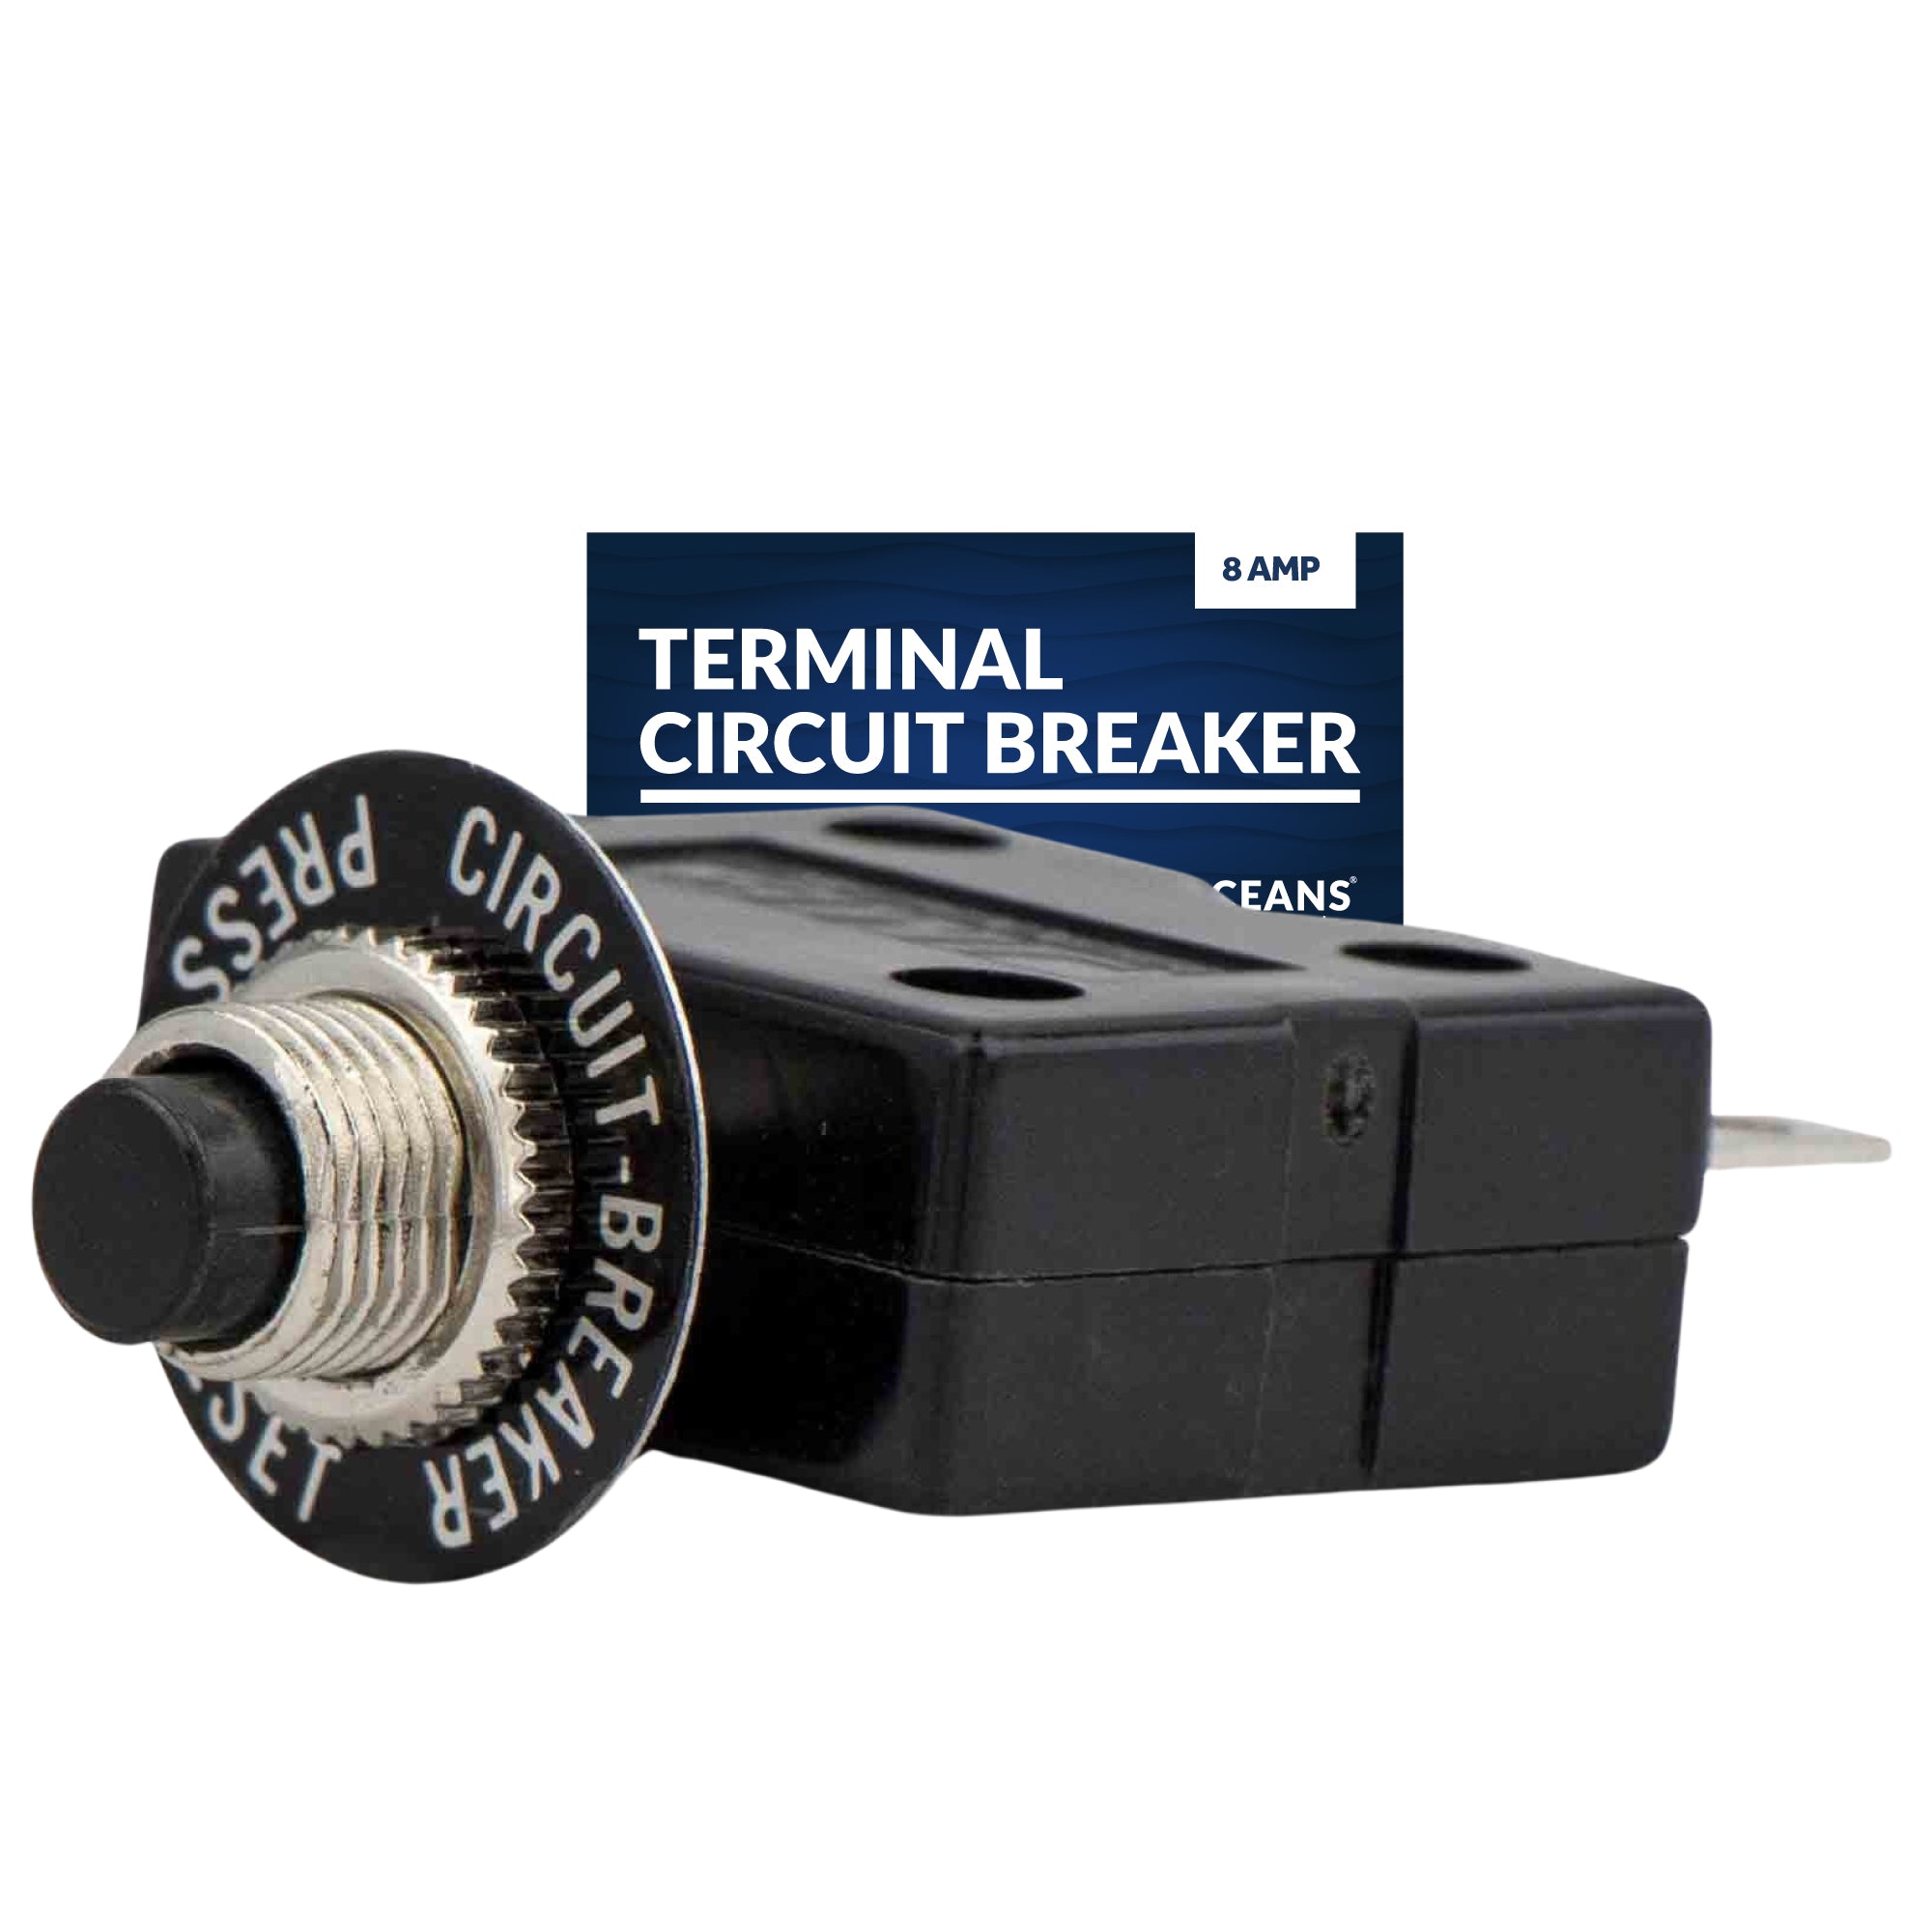 Terminal Circuit Breaker with Reset Button, 8 Amp - FO1680